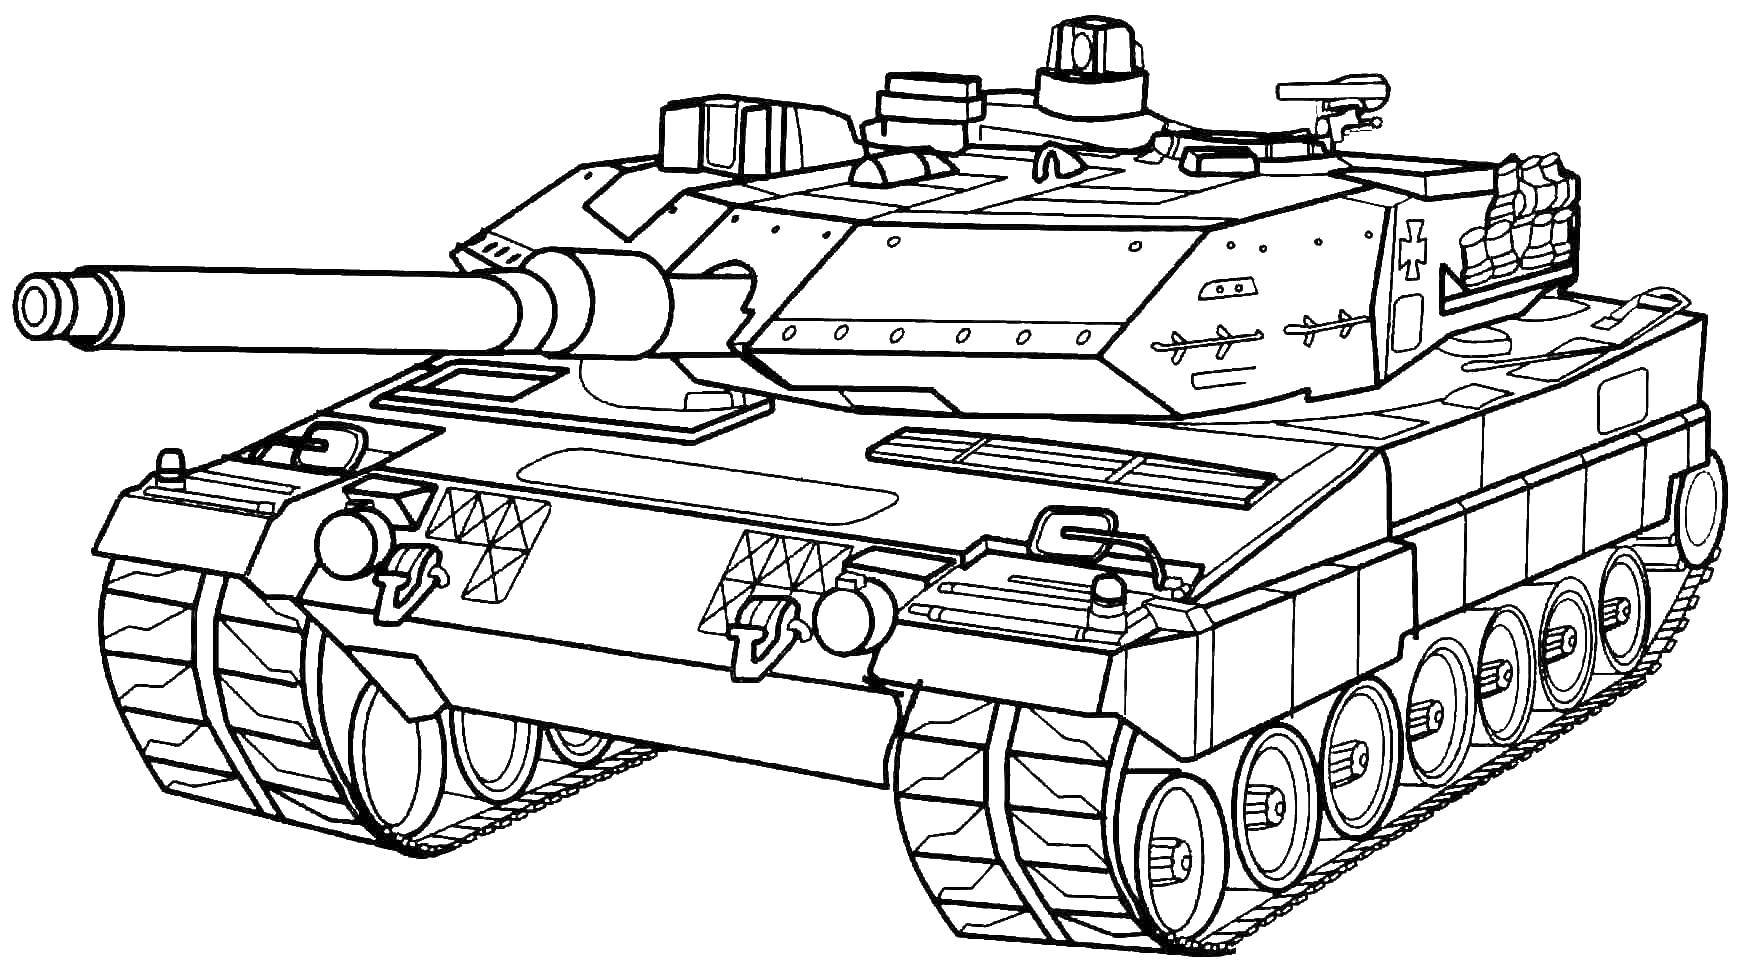 Coloring Tank. Category military. Tags:  Tank, missiles.